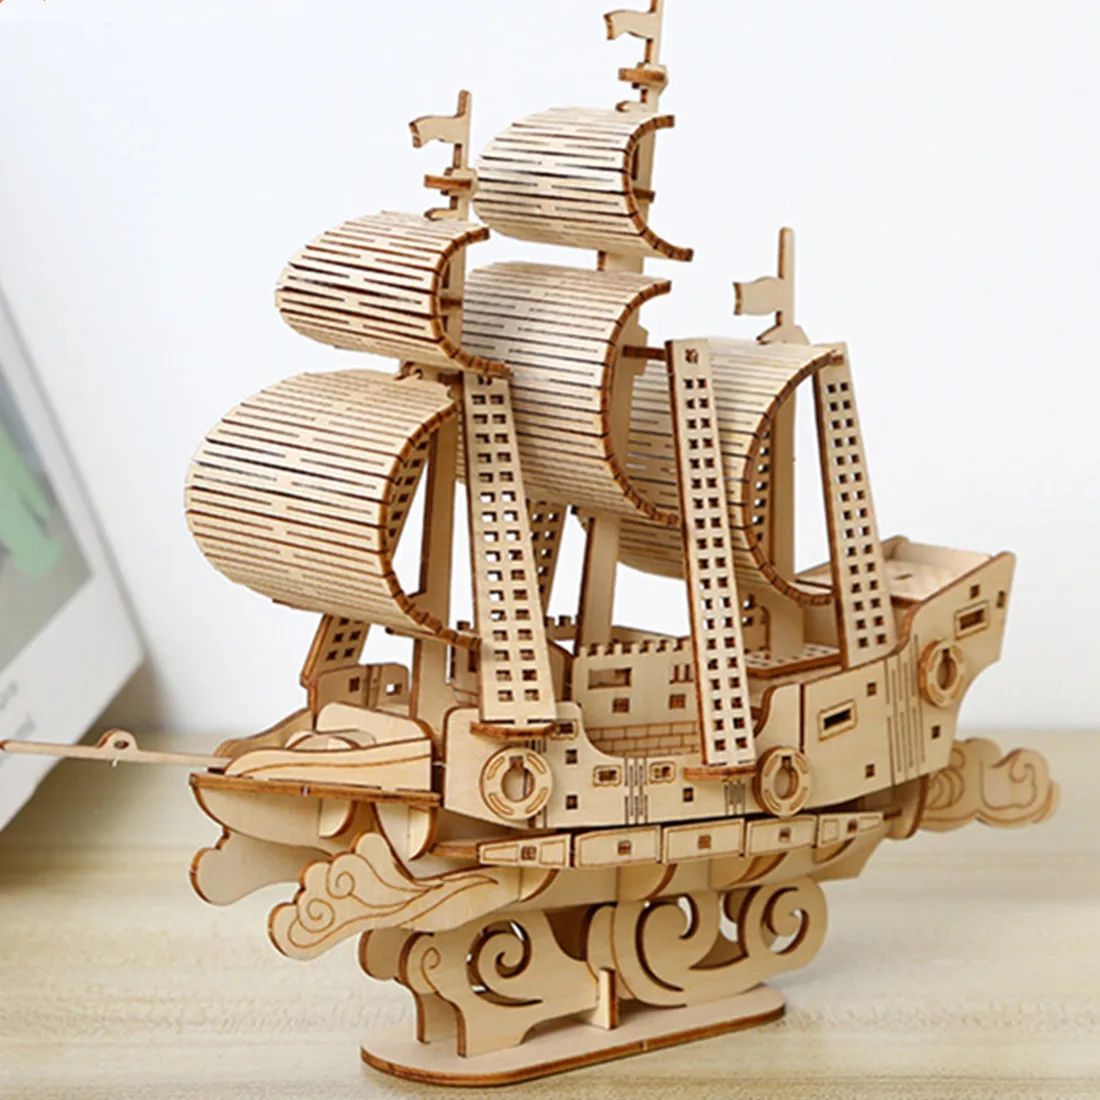 3D Puzzles Wooden Ocean Sailing Model Handmade Boat Building BlockS Kits DIY Assembly Ship Toy for Kids Adults GiftS 1 set city police station car building blocks set police station model toy